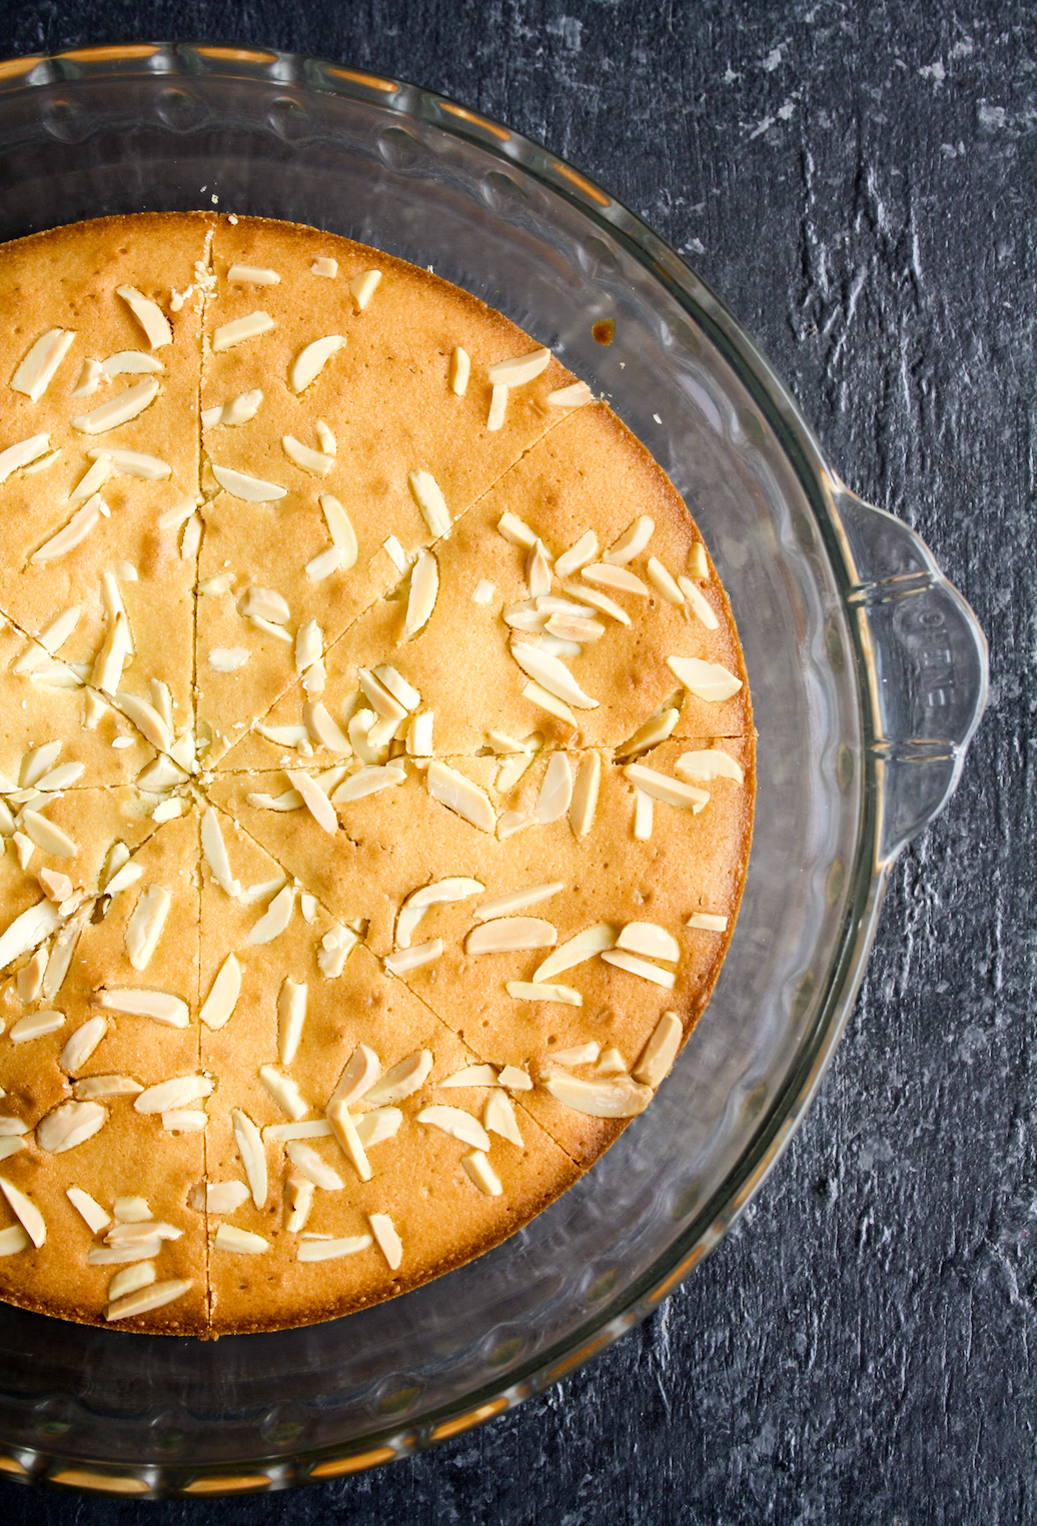 Soft butter cake with lemon zest and almonds